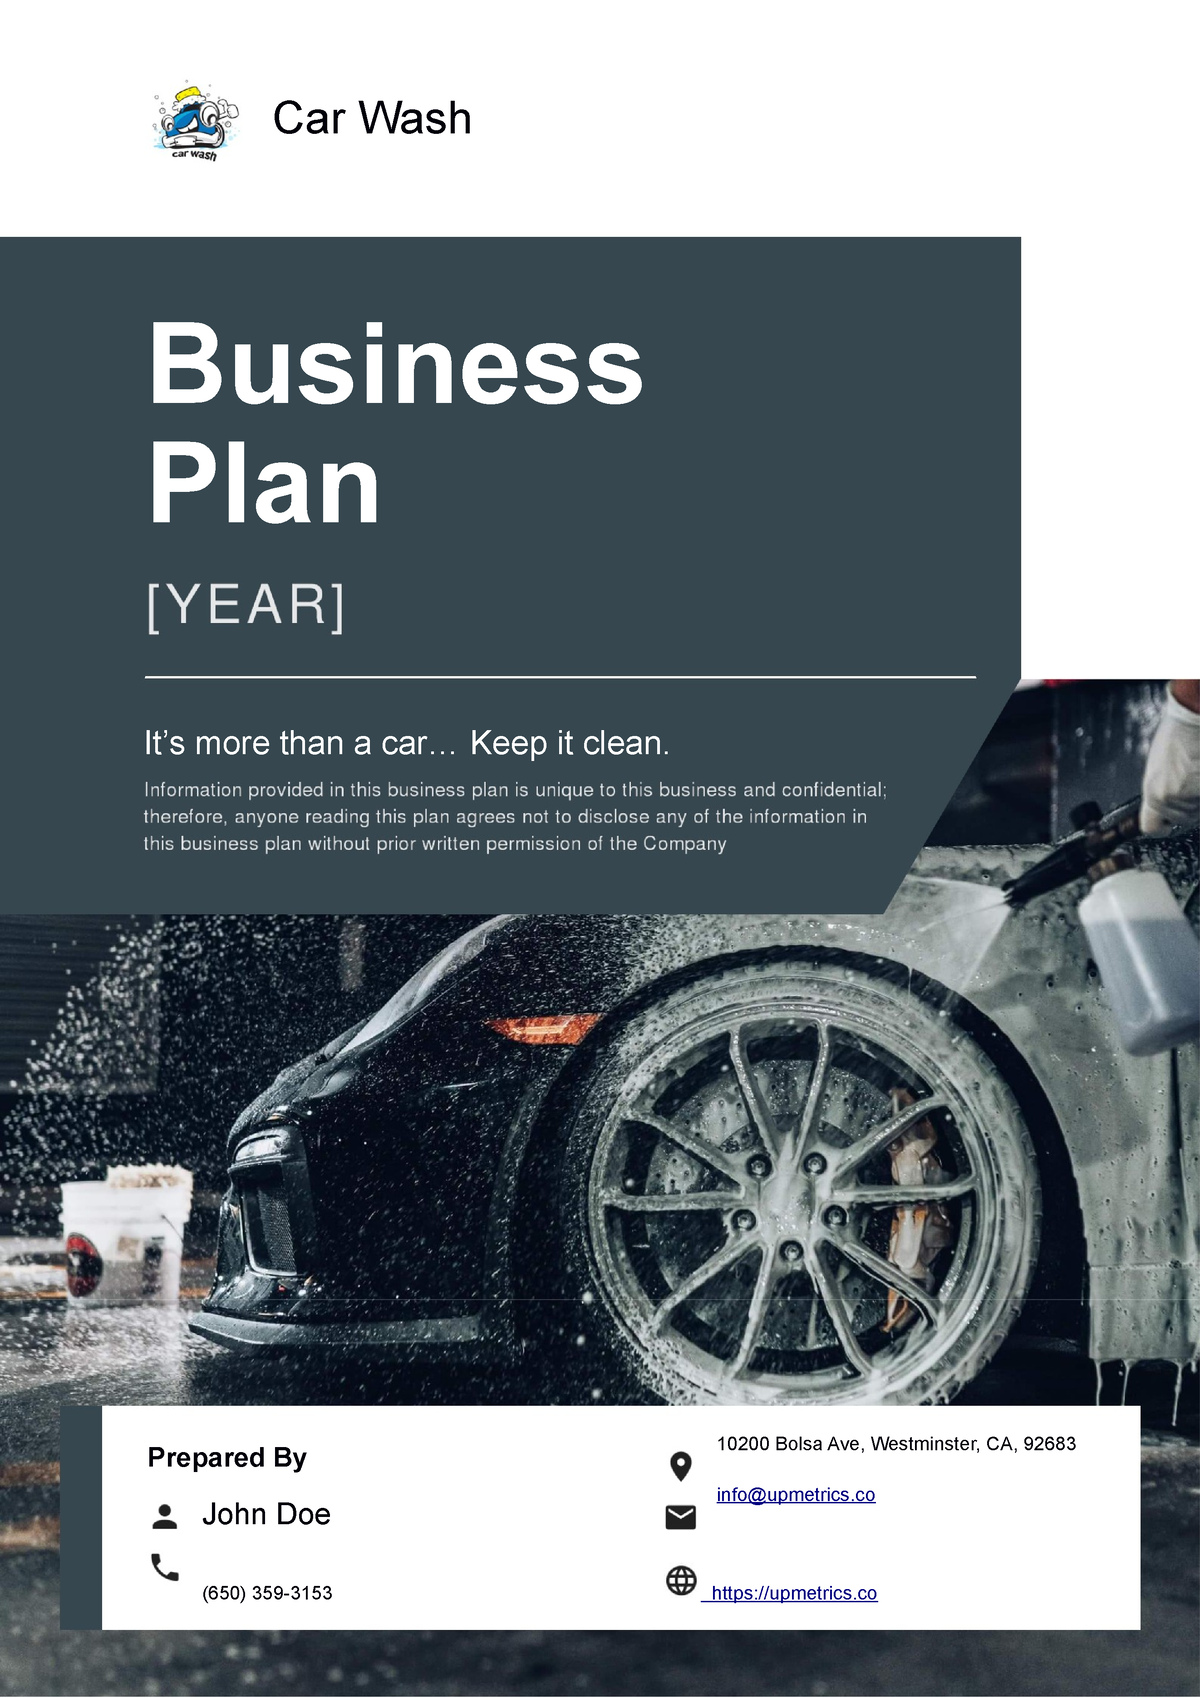 car-wash-business-plan-example-car-wash-business-plan-it-s-more-than